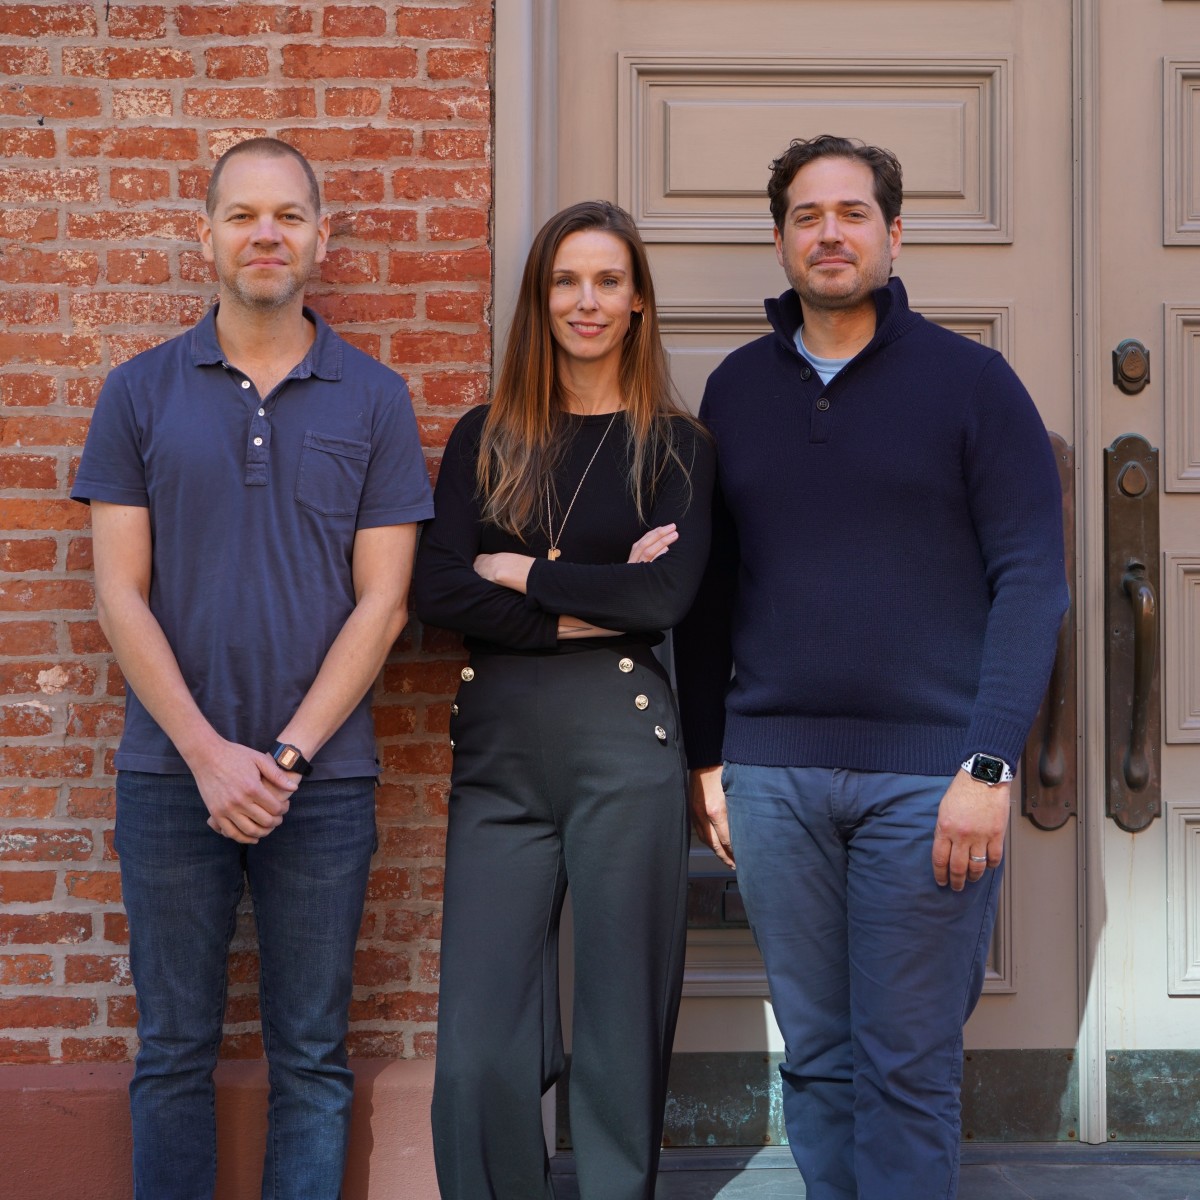 Fora Founders, Evan Frank, Henley Vazquez and Jake Peters leaning against building and smiling.